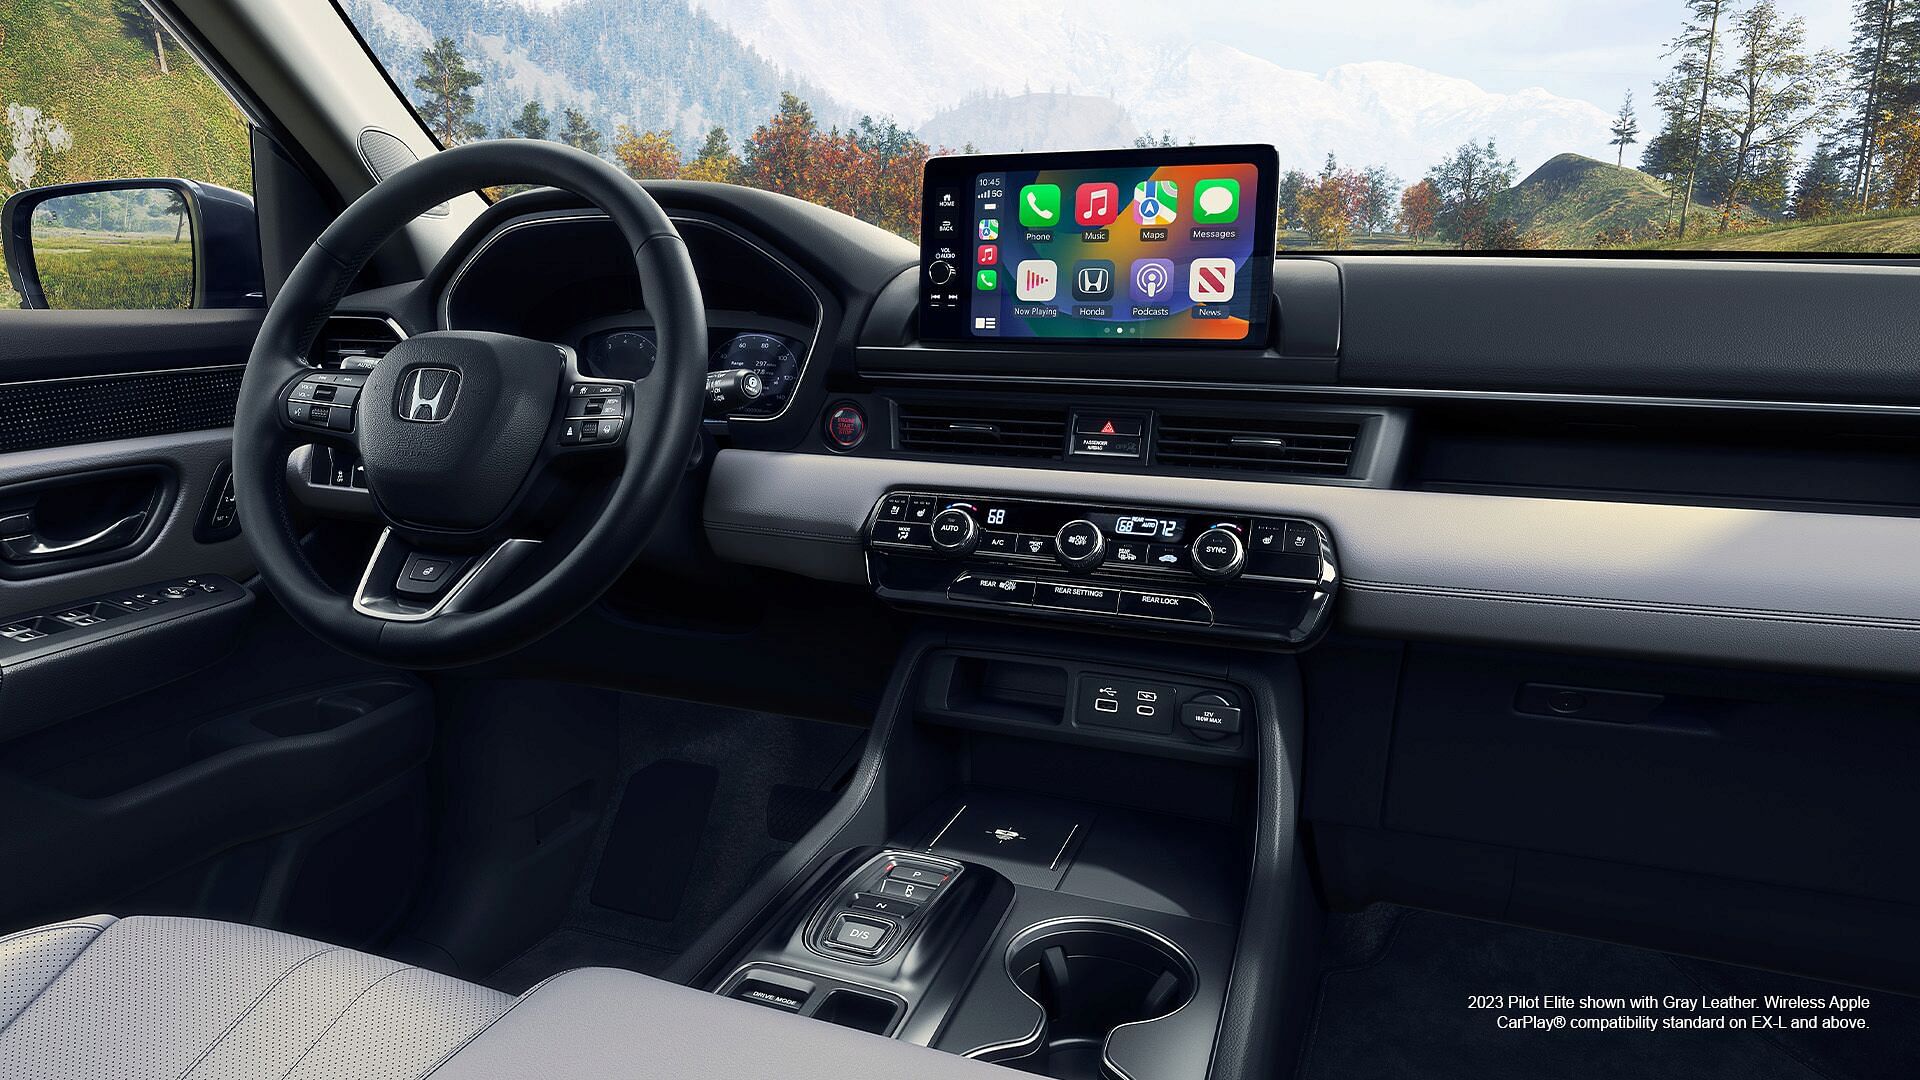 Interior of 2023 Honda Pilot Elite shown with Gray Leather. Wireless Apple CarPlay compatibility standard on EX-L and above.